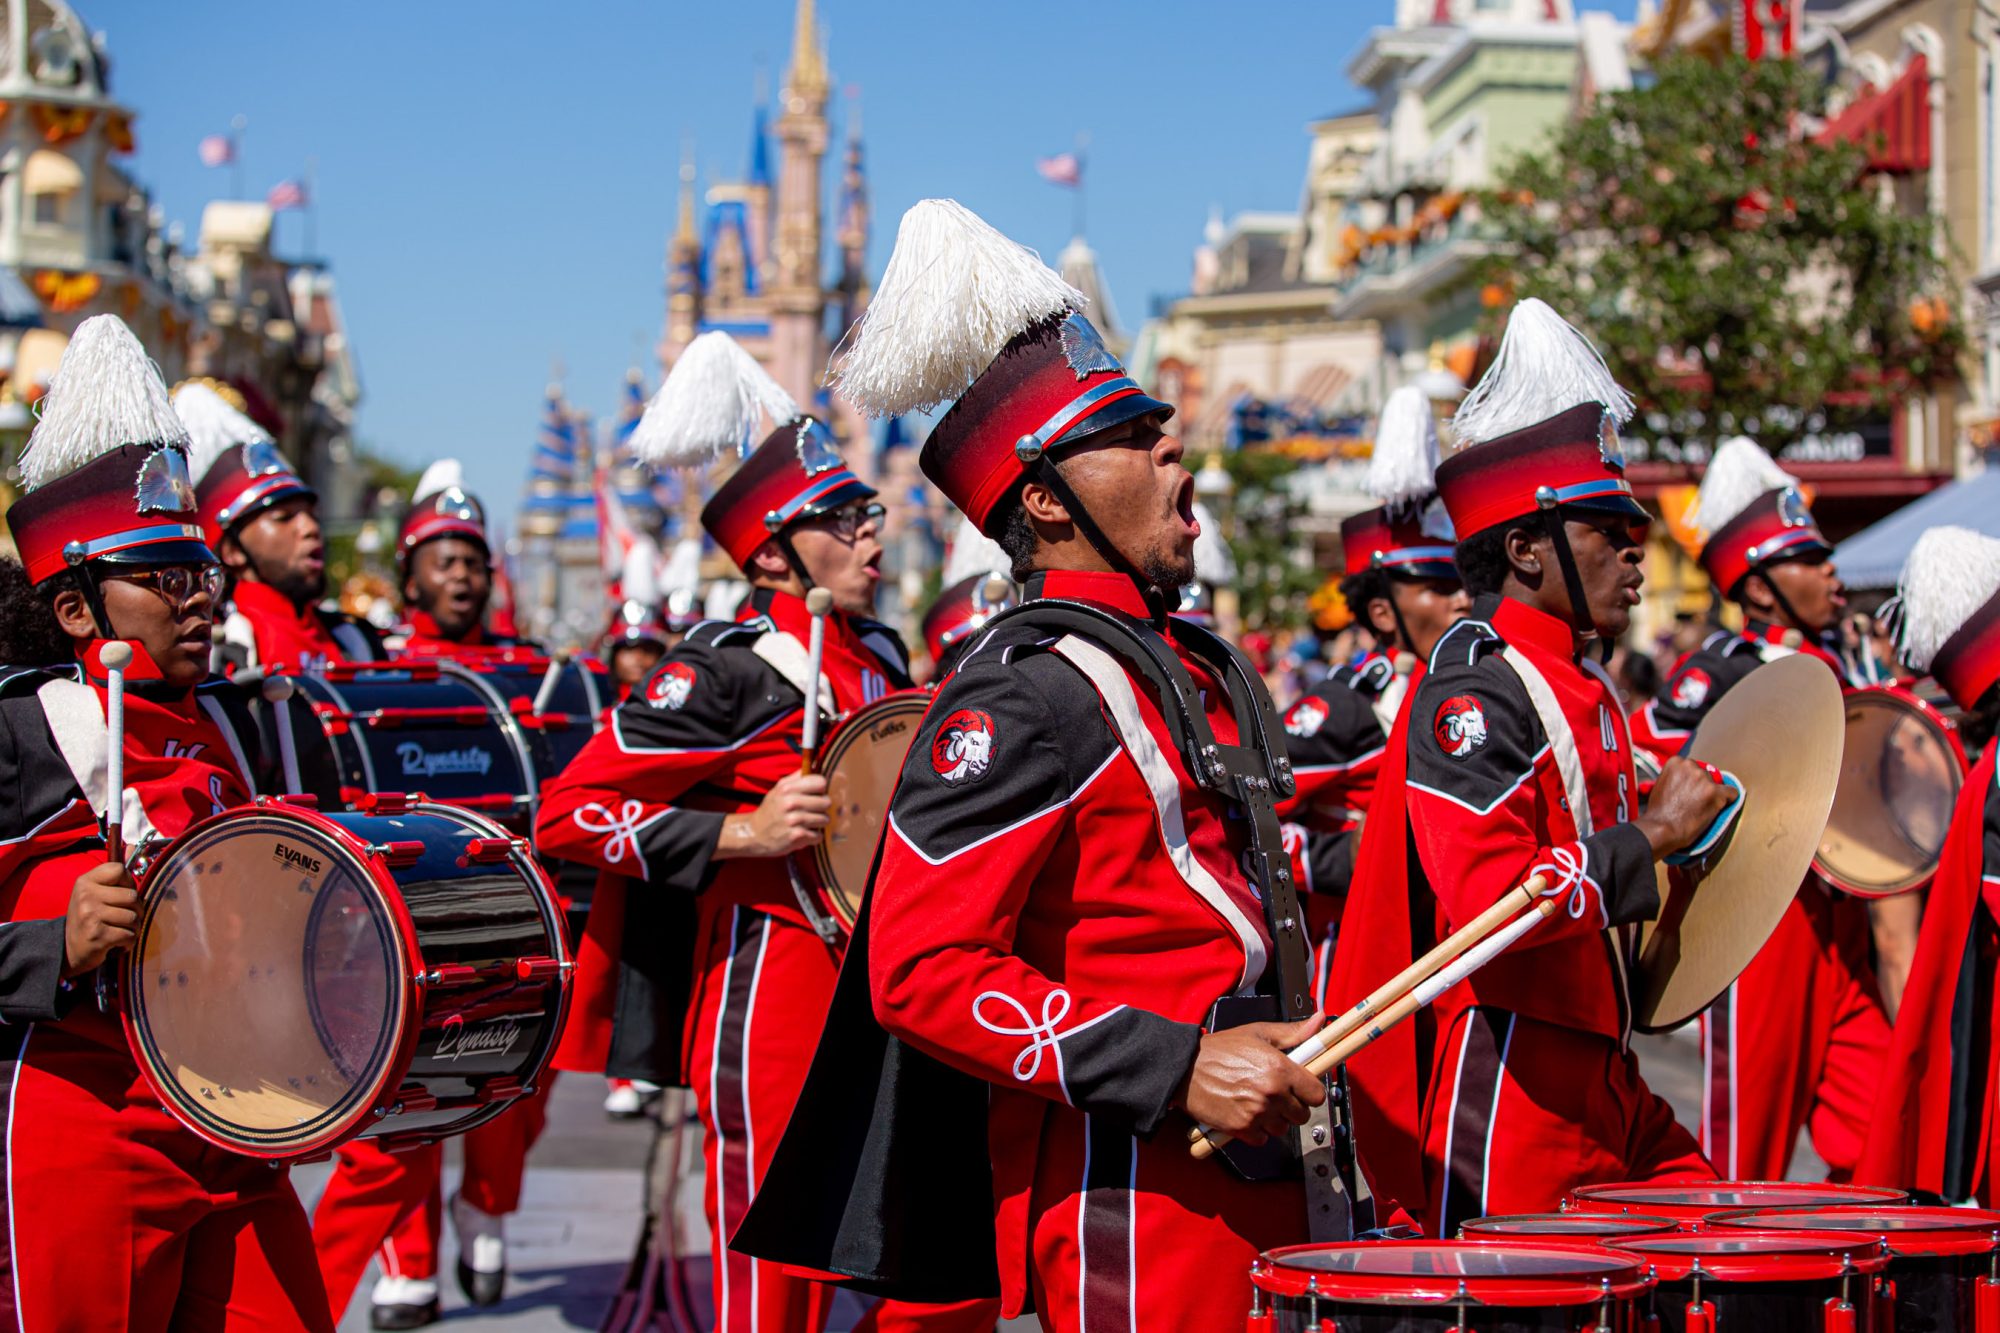 Winston-Salem State, North Carolina A&T State, Alcorn State and Delaware State marching bands served as honorary grand marshals, October 8, 2022, in two parades during HBCU Week at Magic Kingdom Park at Walt Disney World Resort in Lake Buena Vista, Fla. They thrilled guests as they traveled down Main Street, U.S.A., led by none other than Drum Major Mickey Mouse, who showed off his own show-stopping moves in his signature marching band uniform. (Courtney Kiefer, photographer).